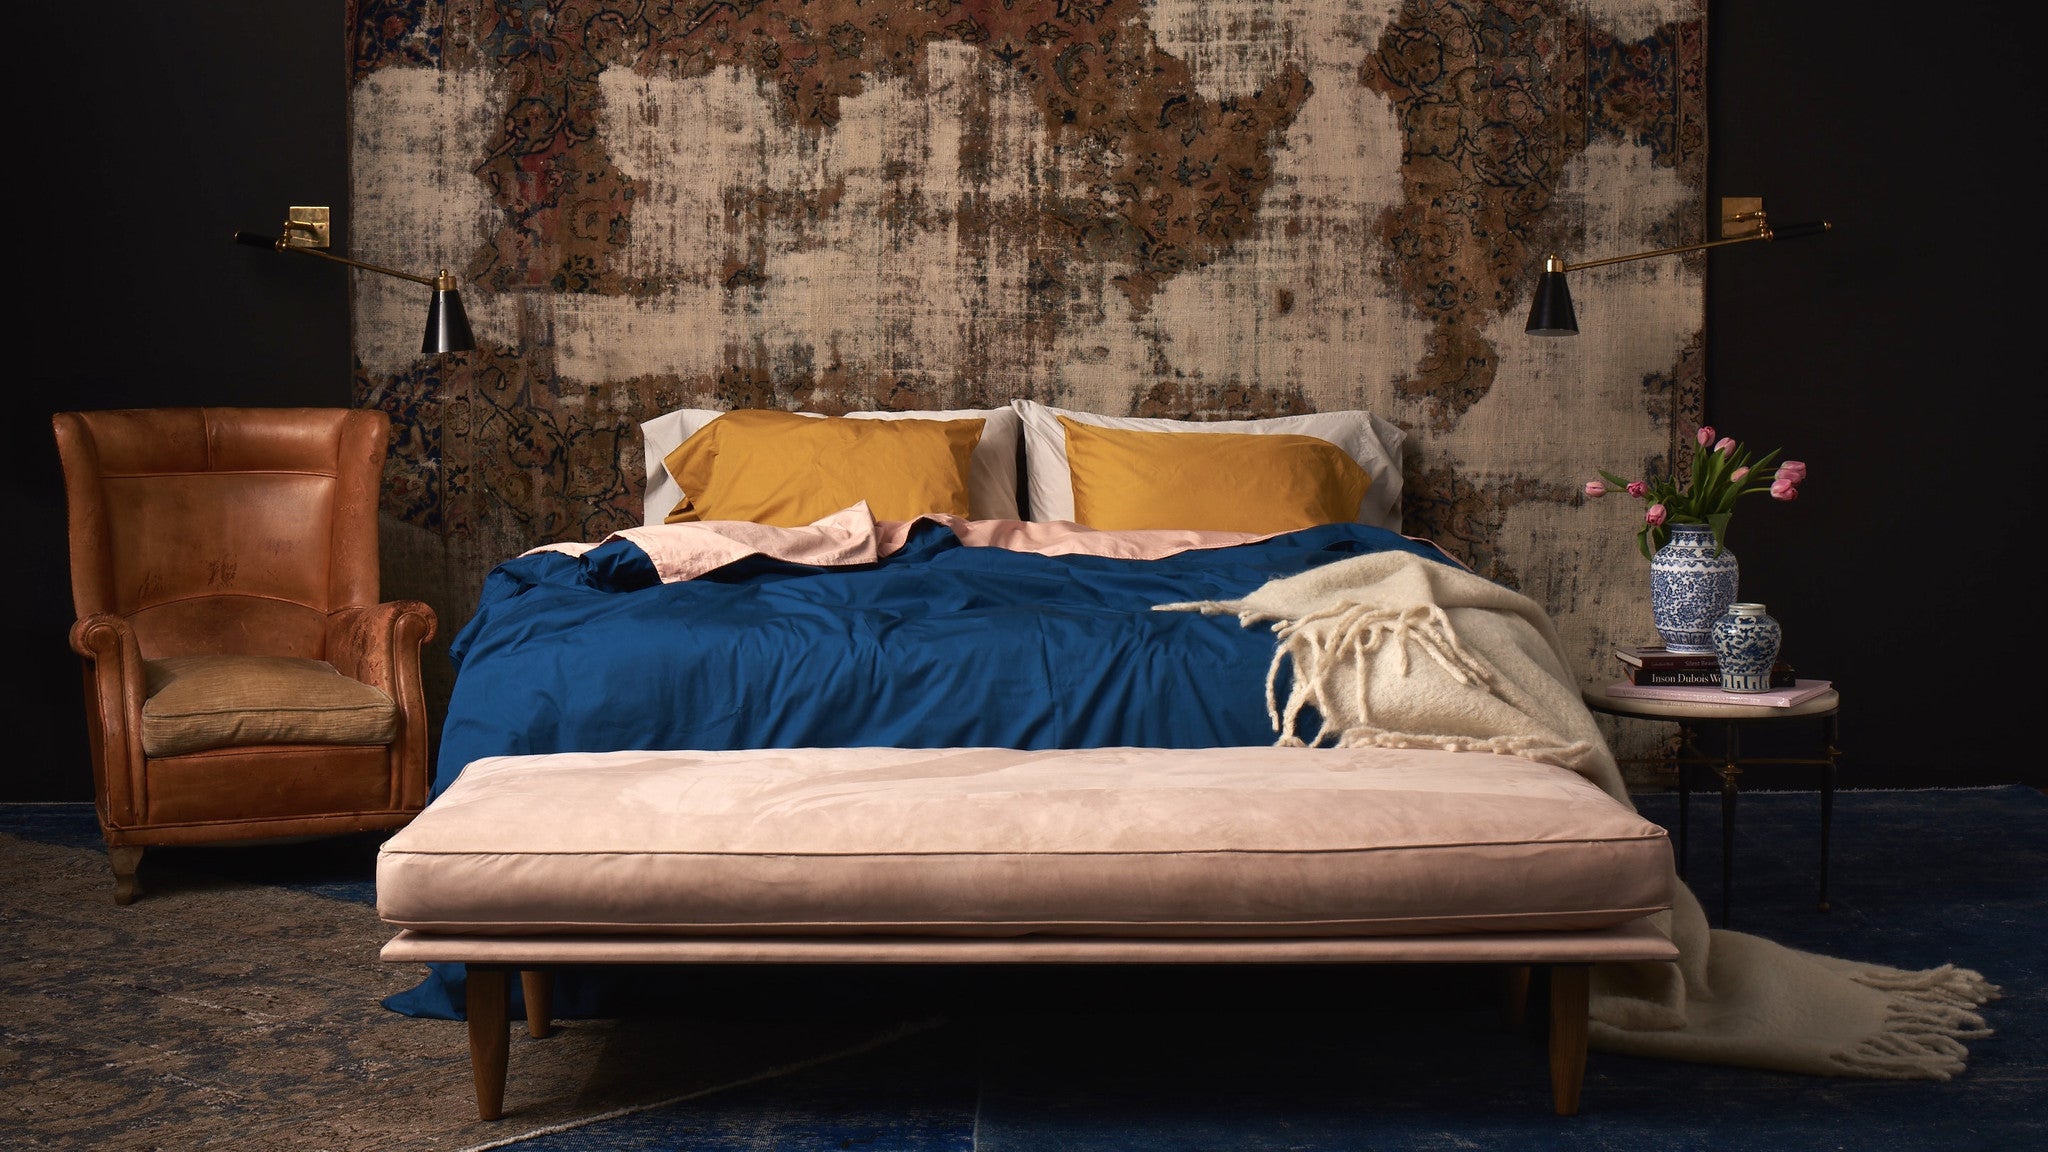 "This is the Bespoke Bedding Hollywood is Coveting"